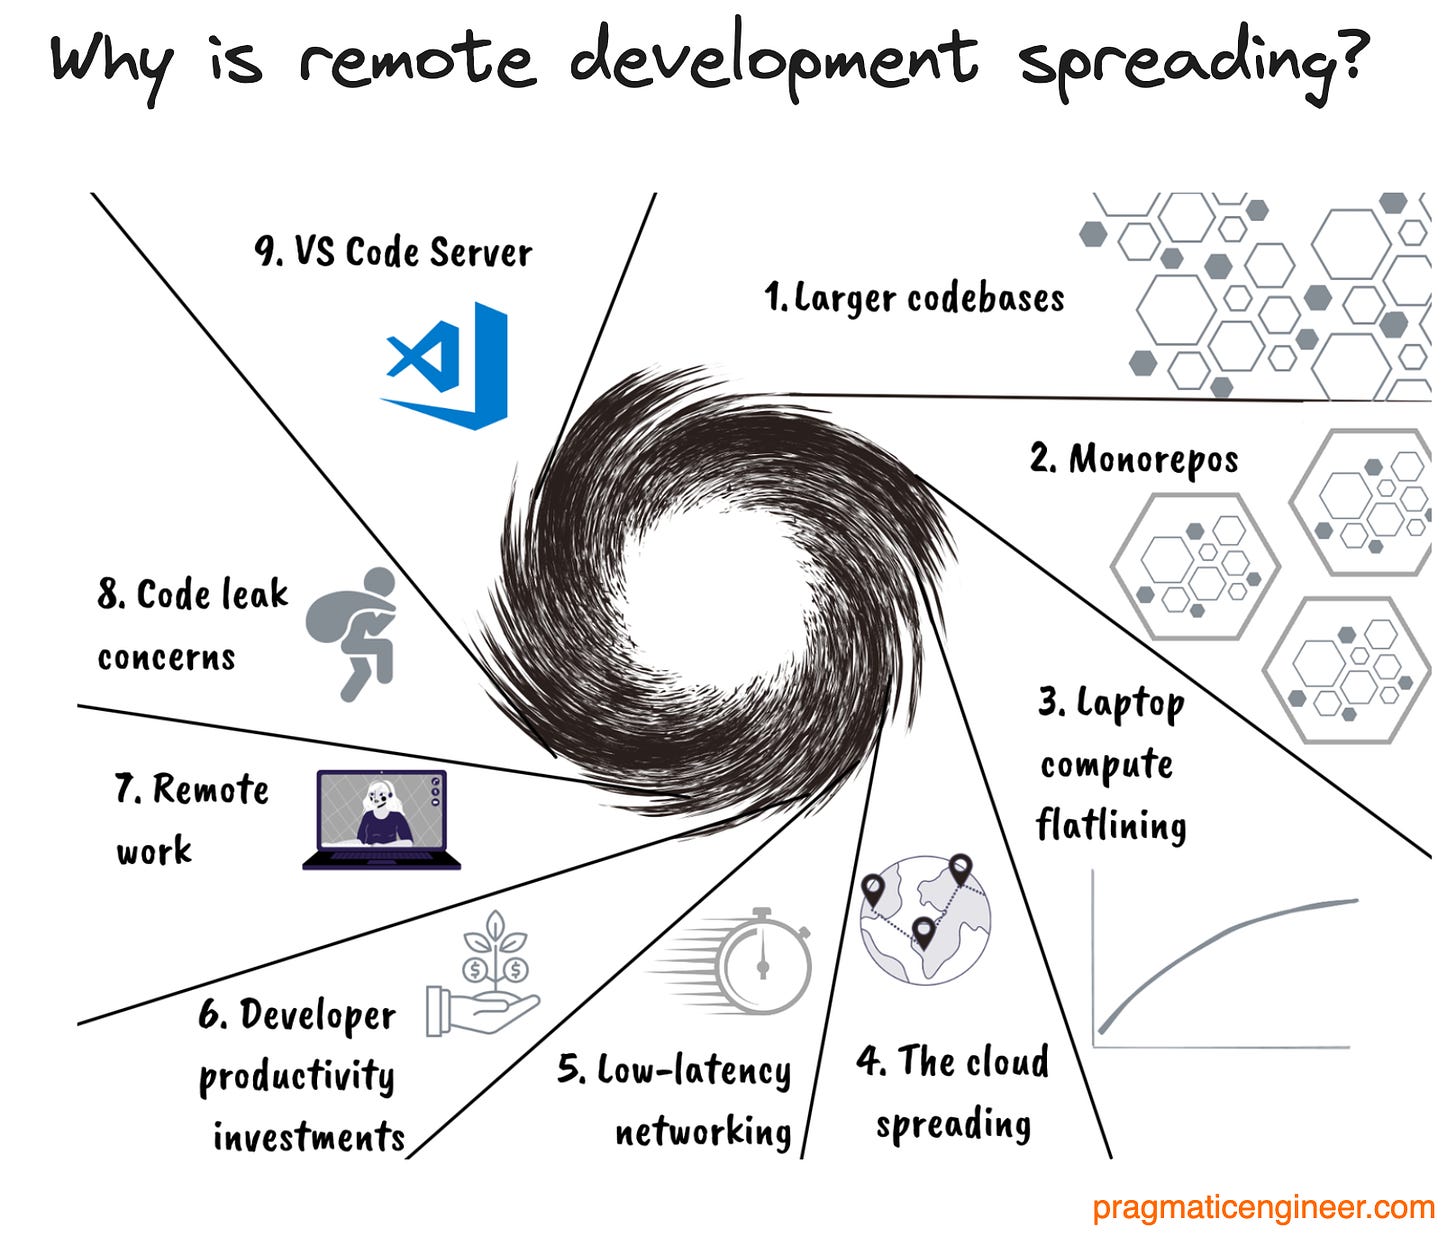 Reasons why remote development and cloud development environments are getting popular